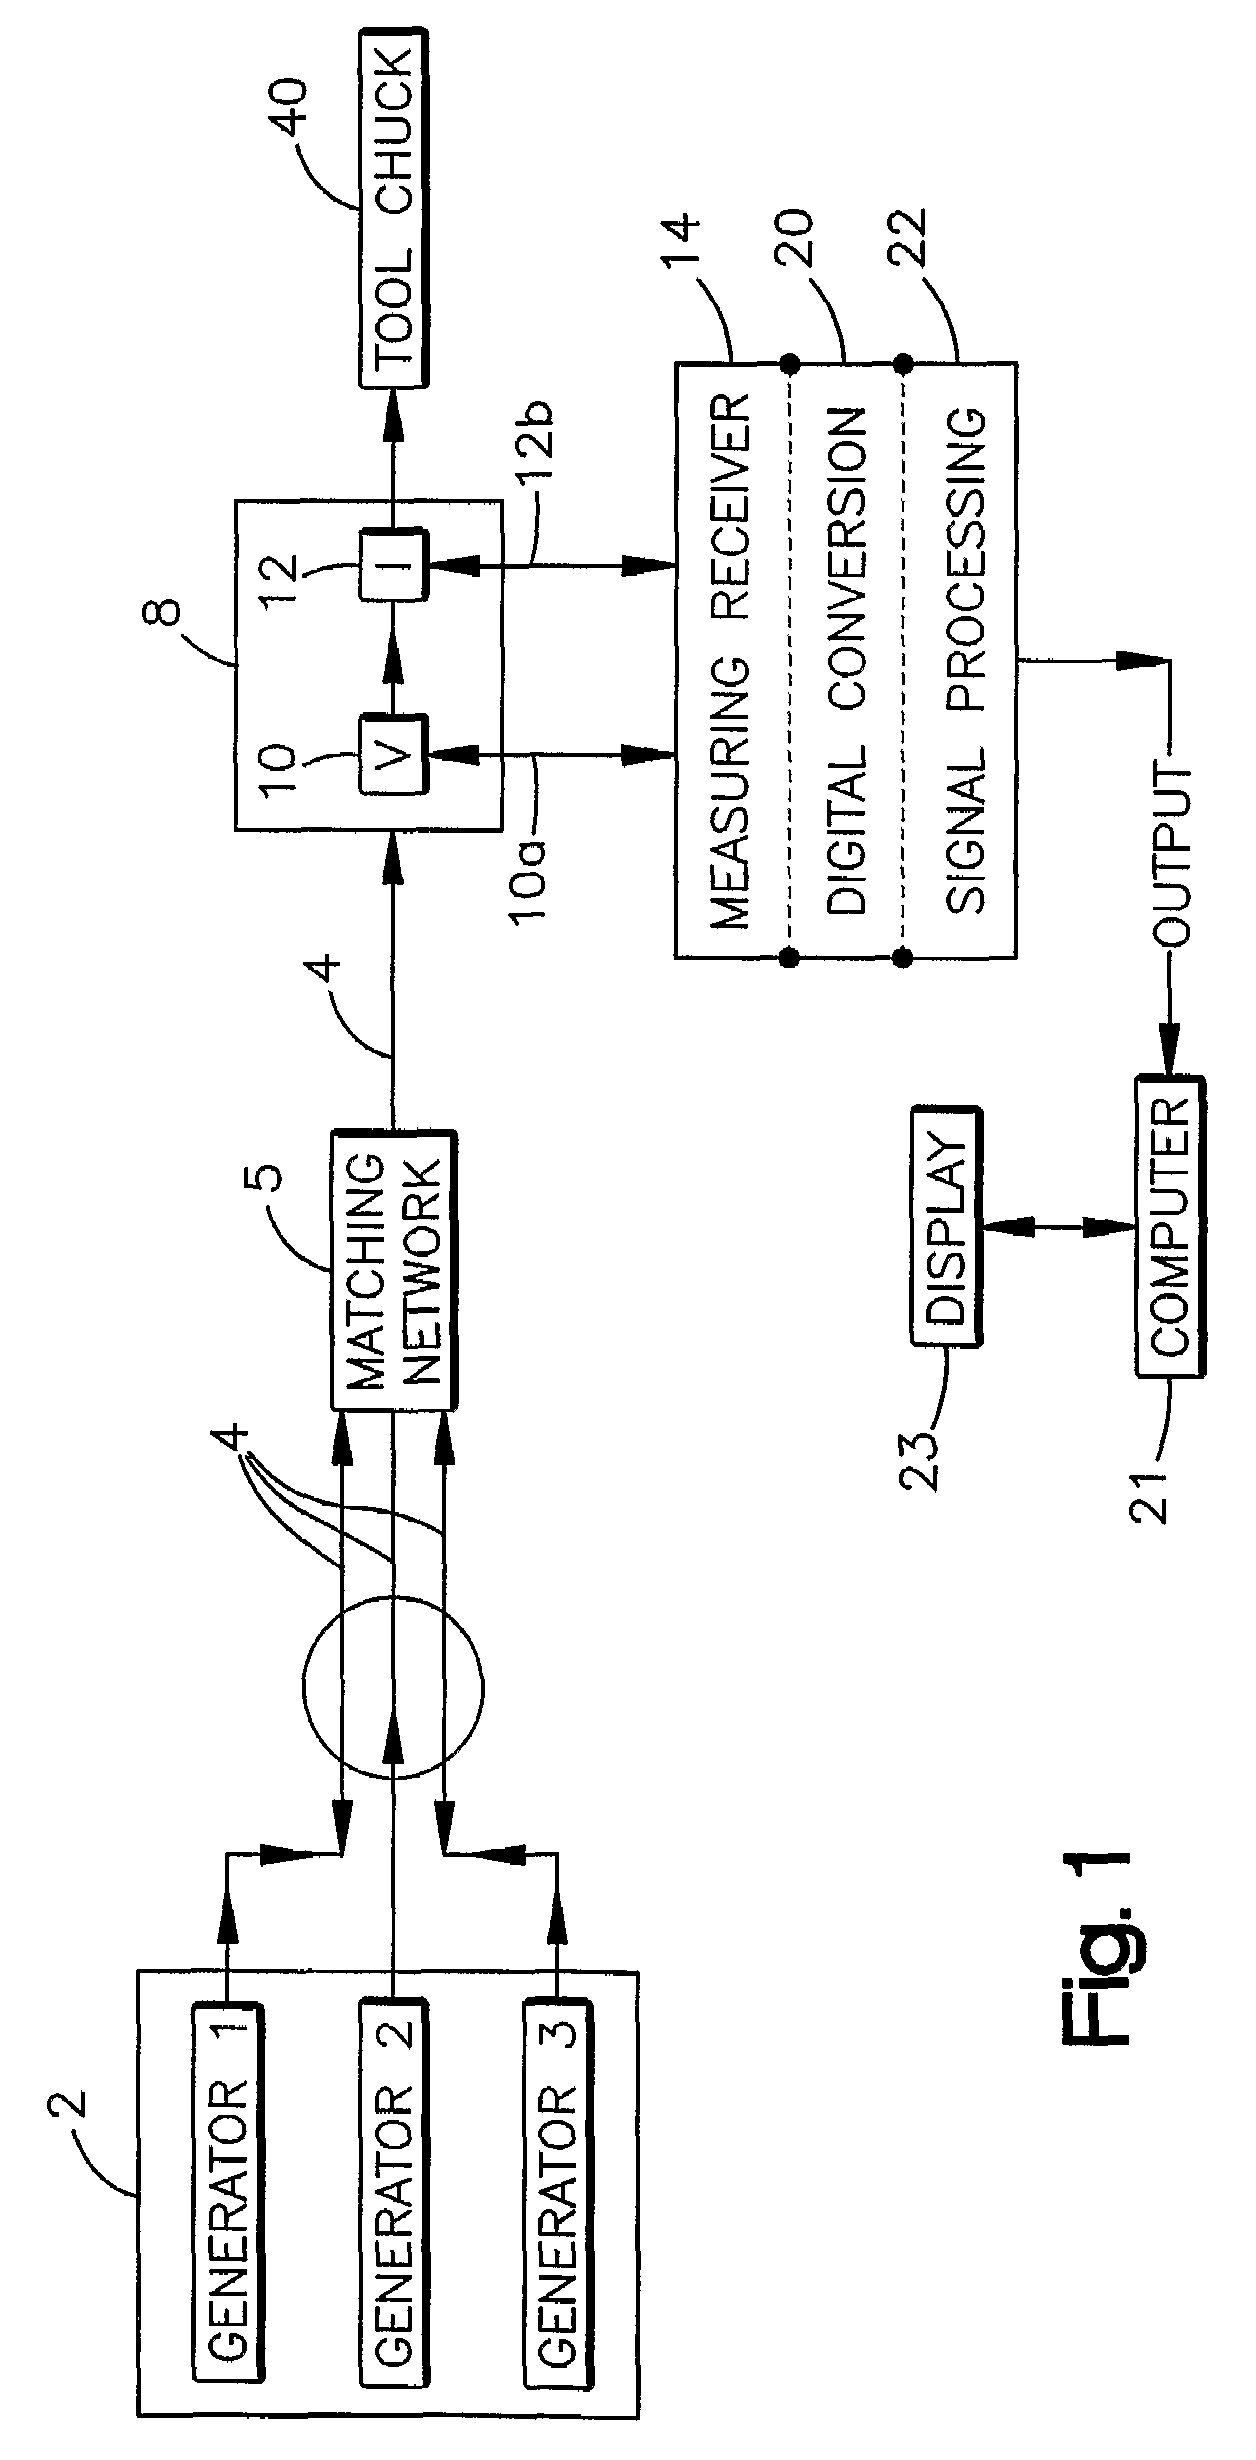 System and method for analyzing power flow in semiconductor plasma generation systems